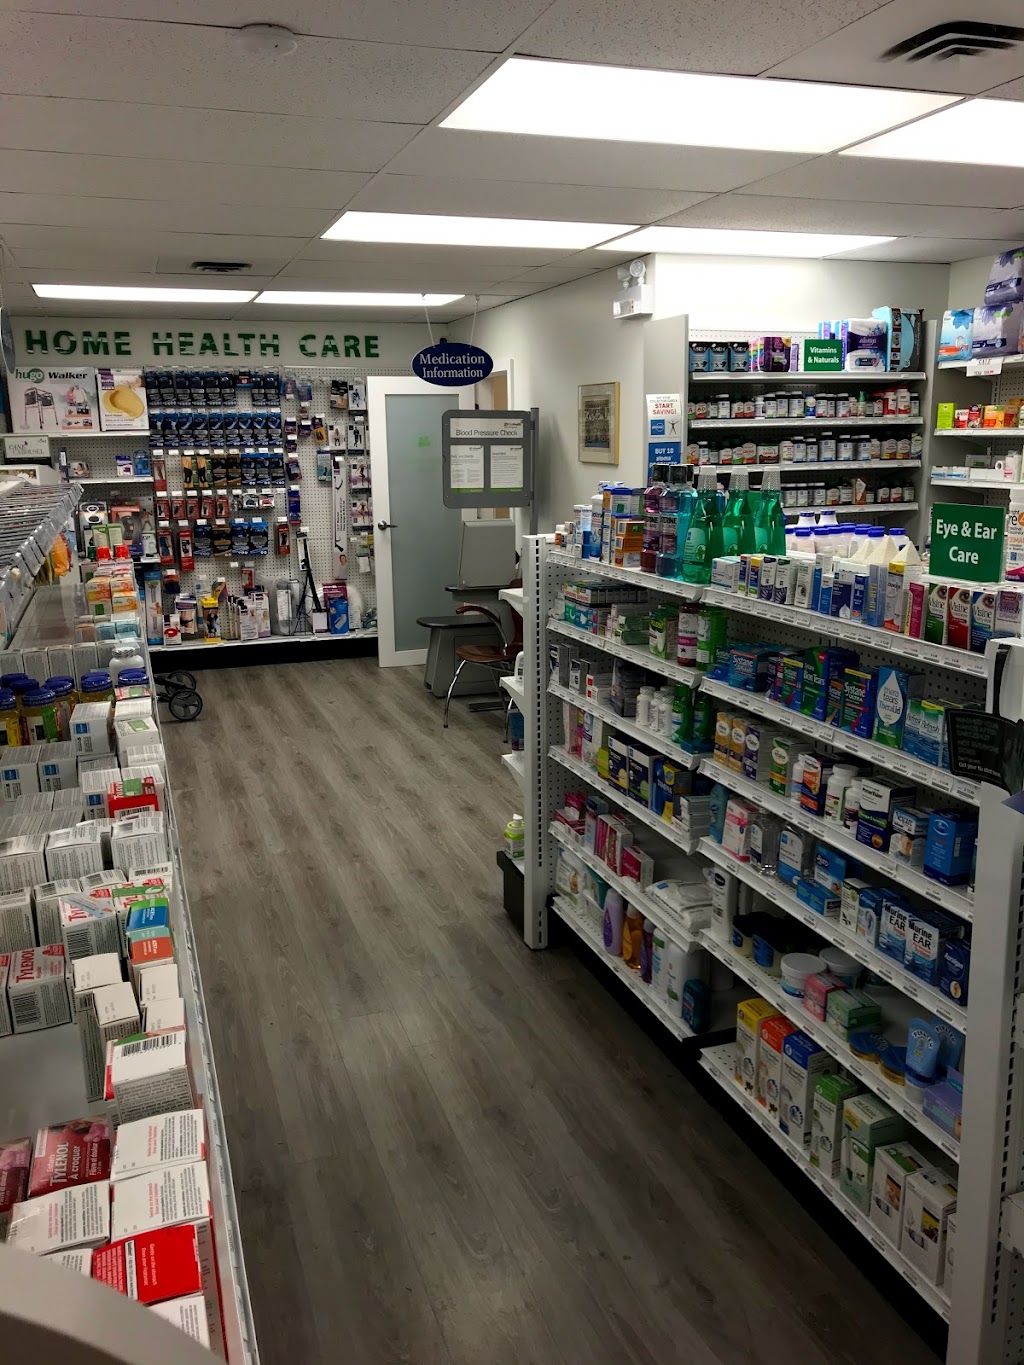 Brookswood RemedysRx Pharmacy | health | 20103 40 Ave #100, Langley, BC V3A 2W3, Canada | 6044272140 OR +1 604-427-2140